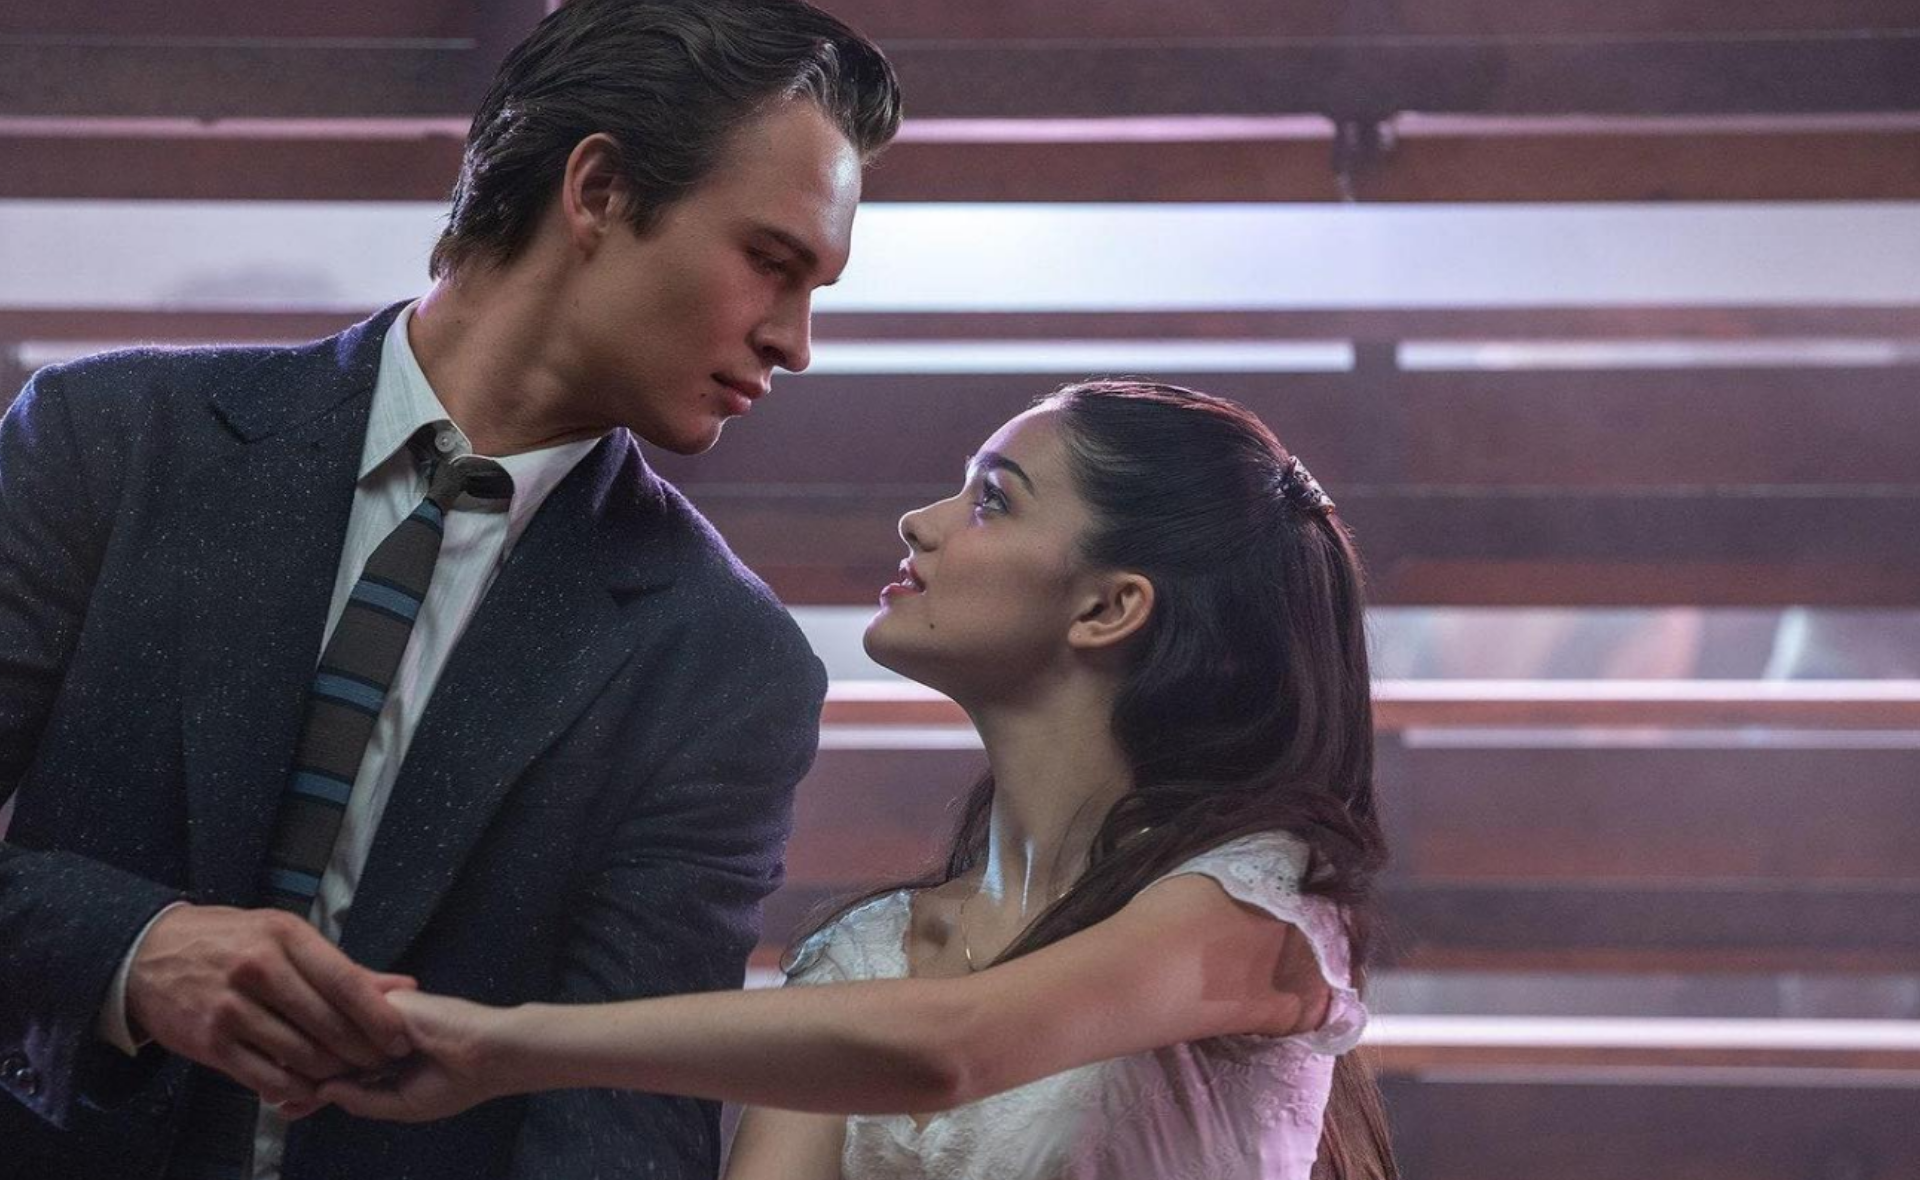 Ready for a singalong? Here’s how to watch the 2021 West Side Story film in Australia